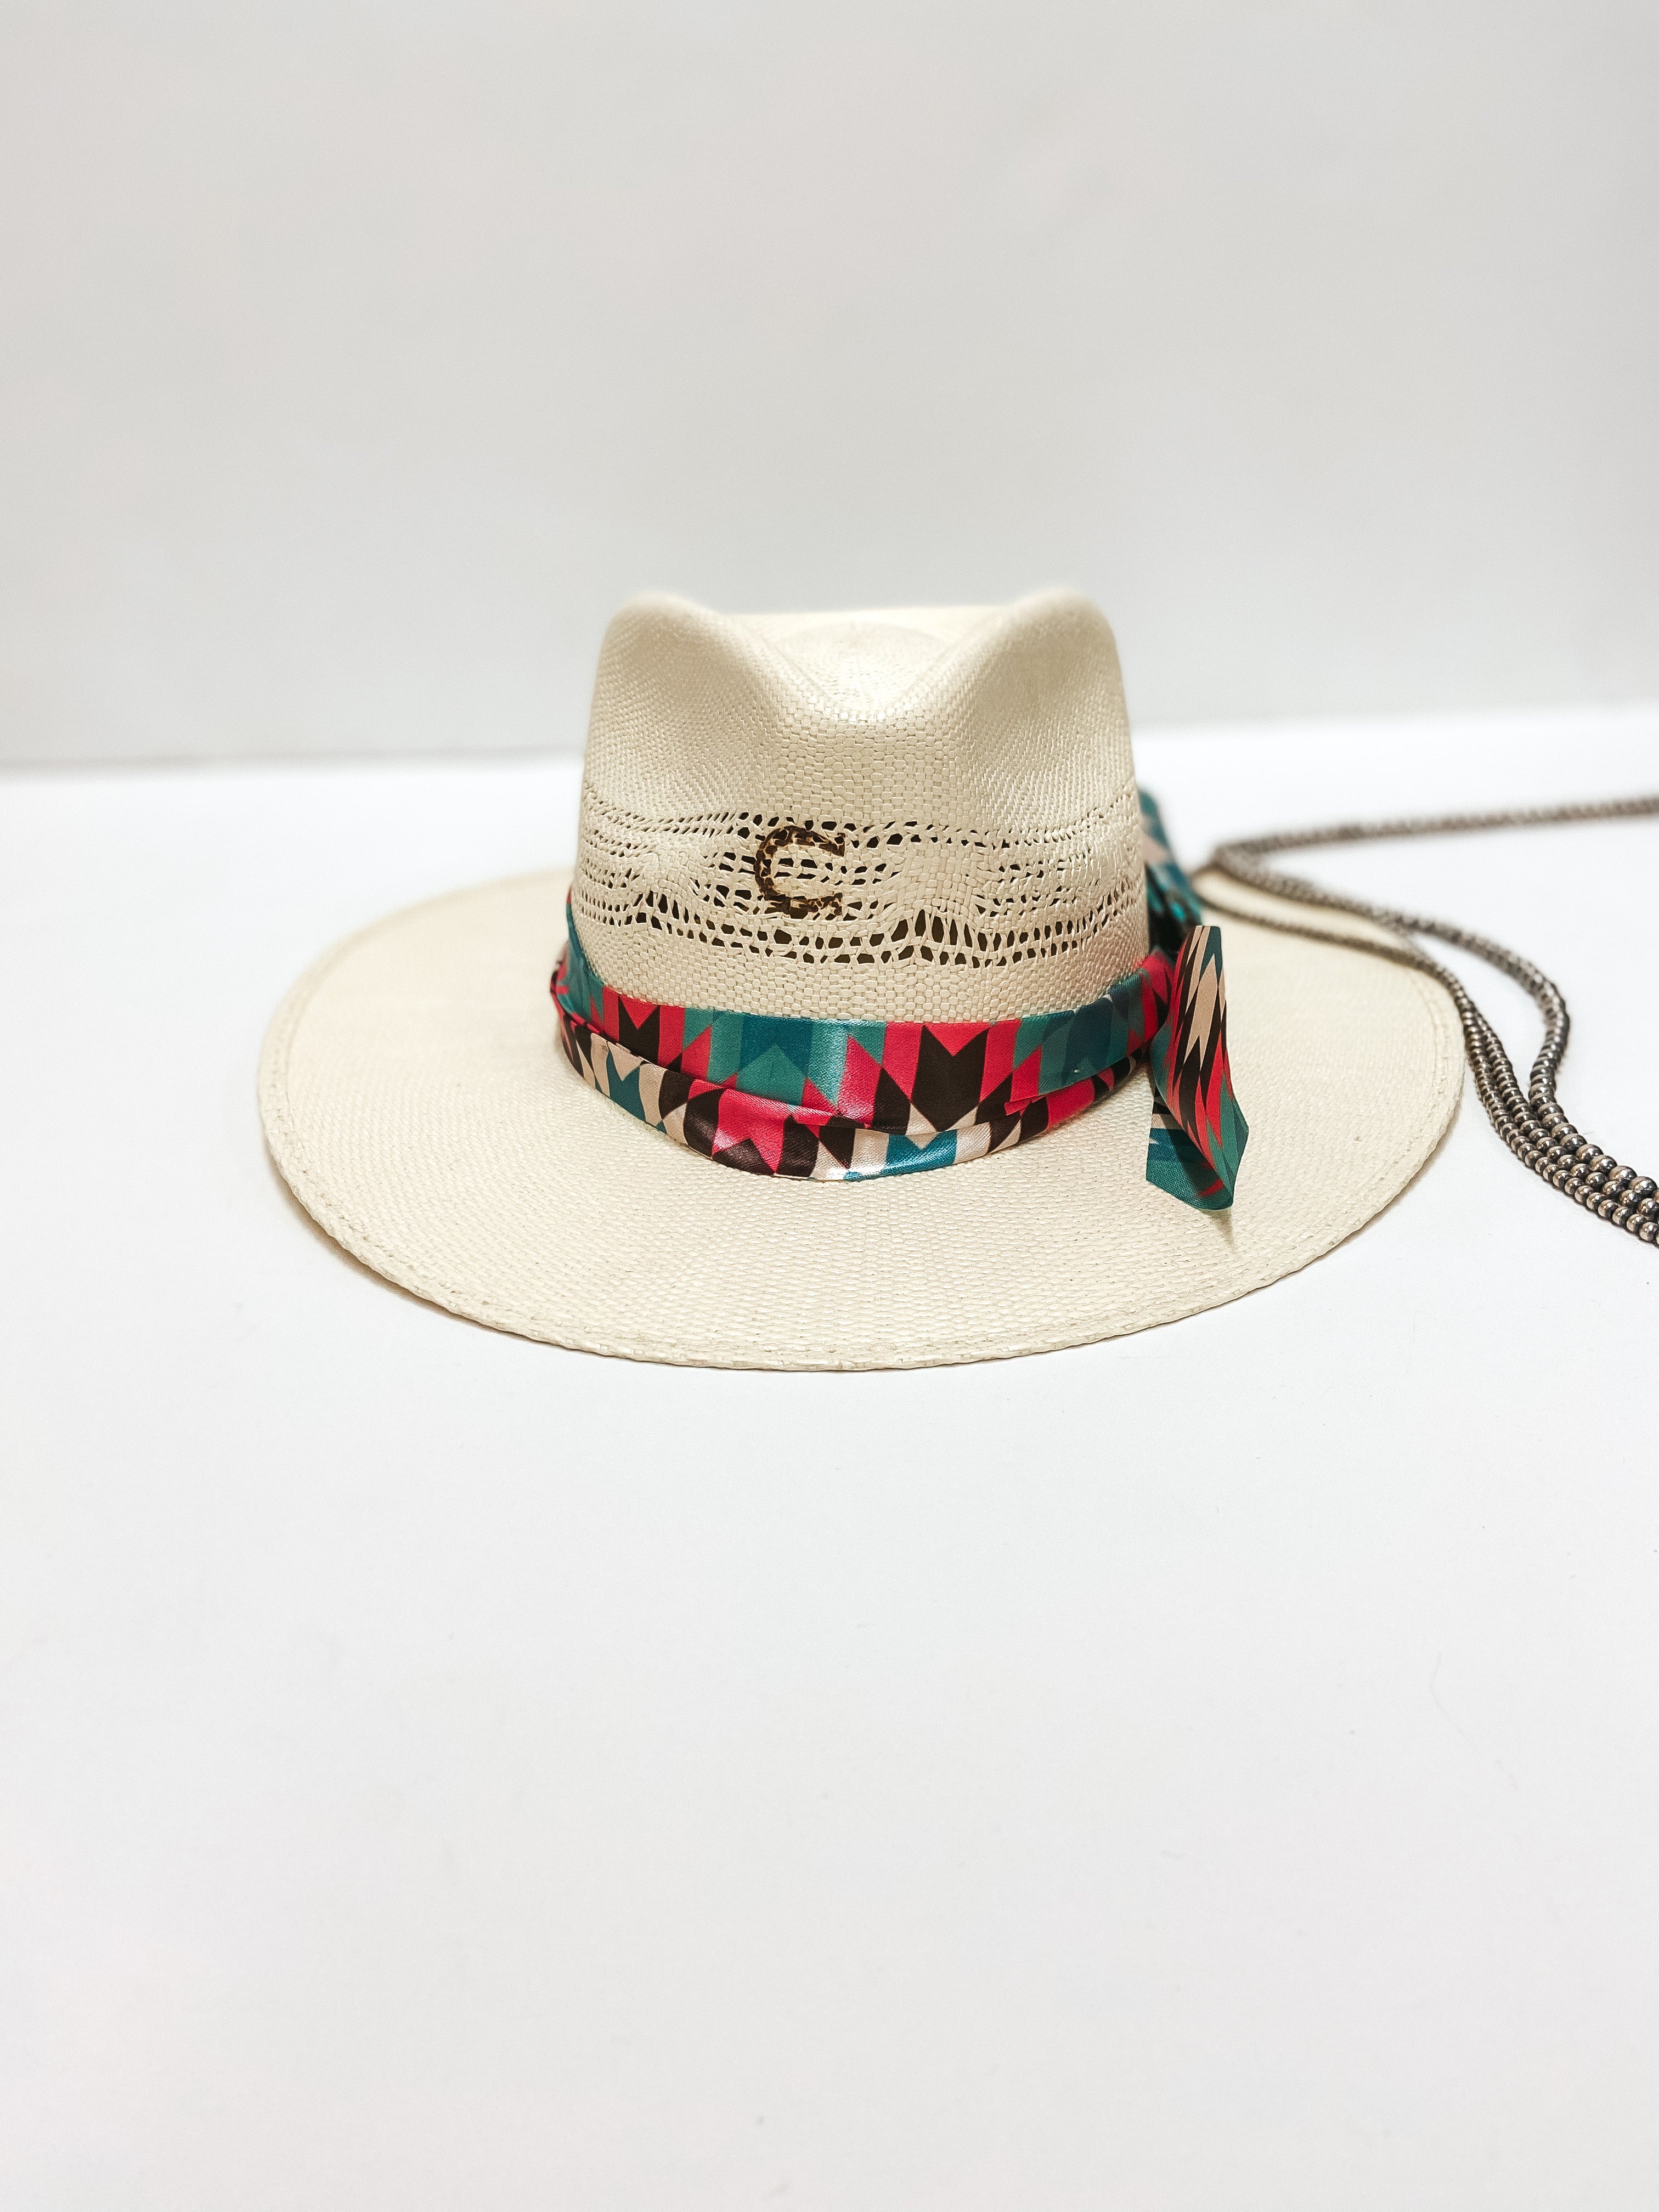 Charlie 1 Horse | Hissy Fit Straw Hat with Aztec Print Ribbon Band and Silver and Turquoise Concho Pin - Giddy Up Glamour Boutique